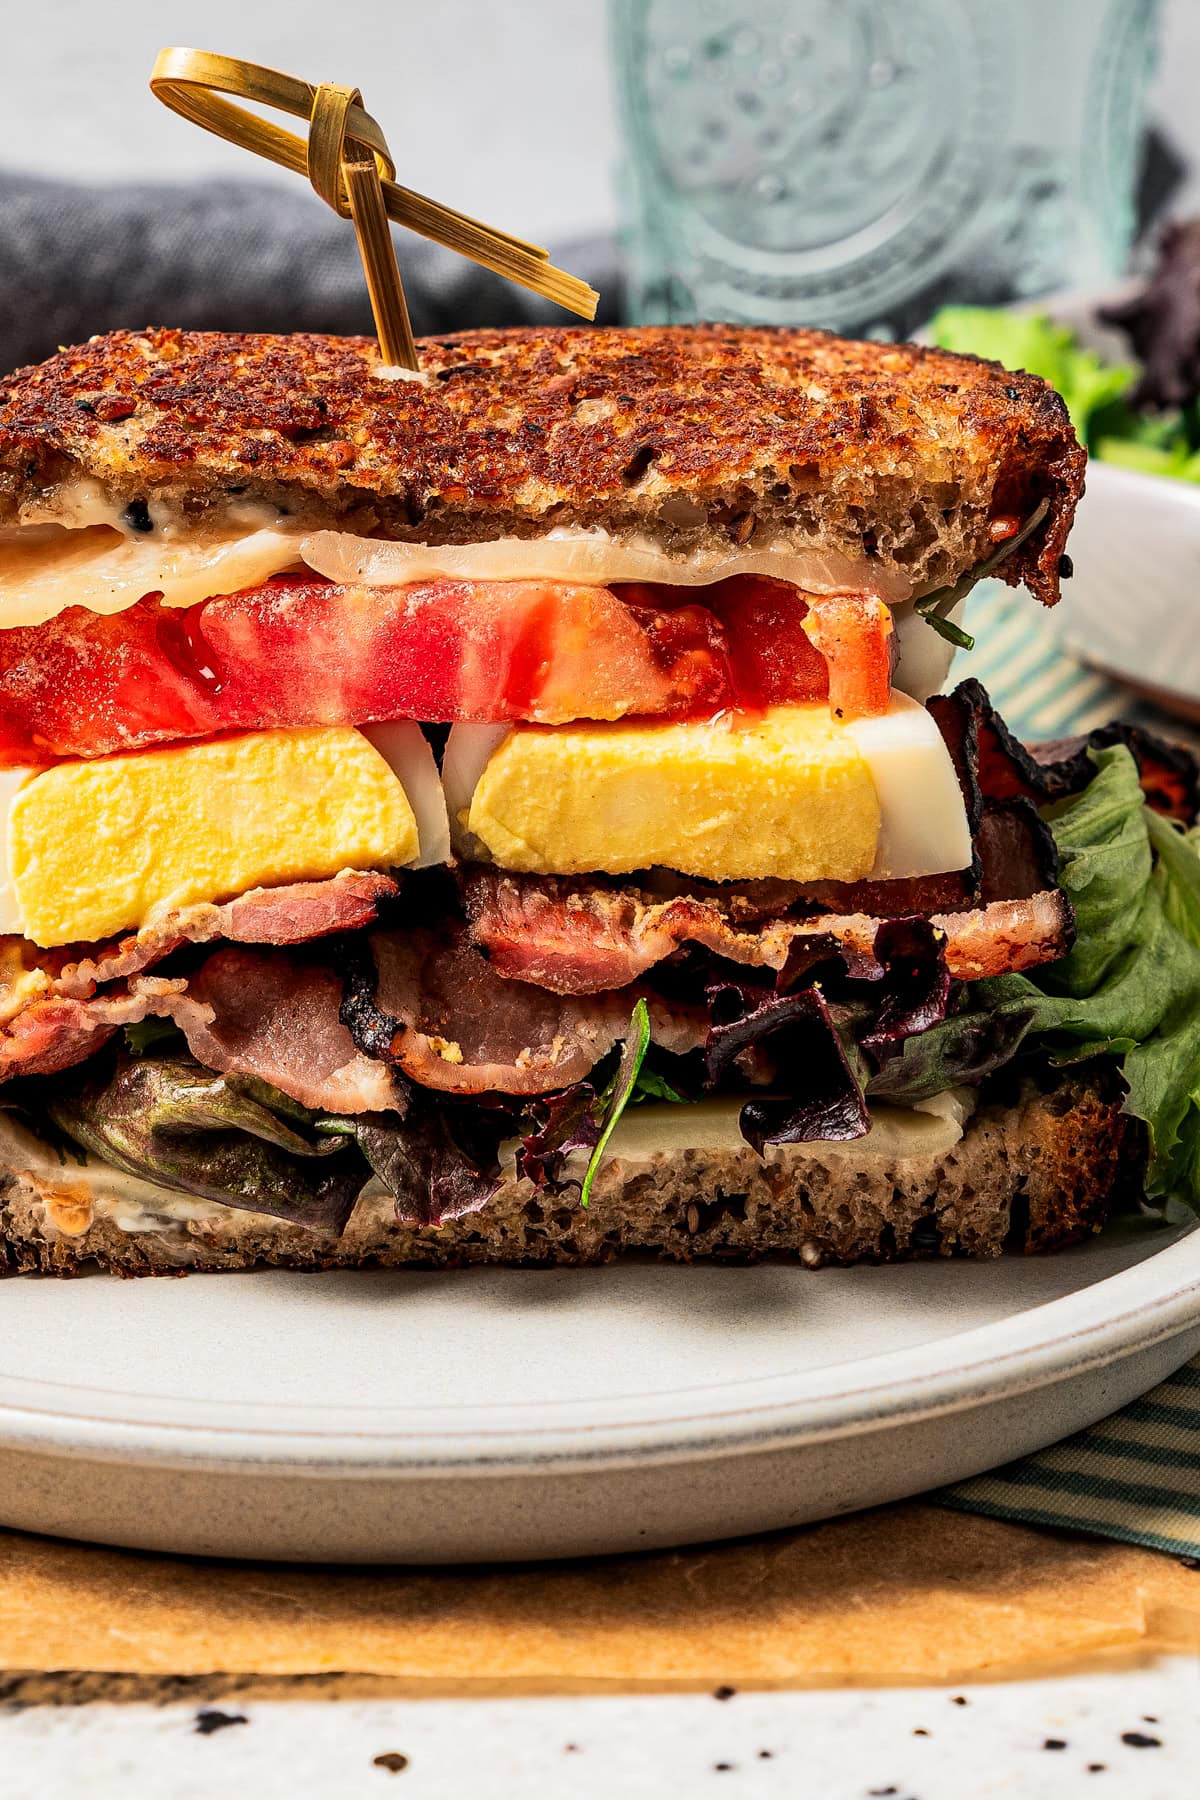 Close-up image of a grilled cheese sandwich with tomatoes, eggs, and bacon.